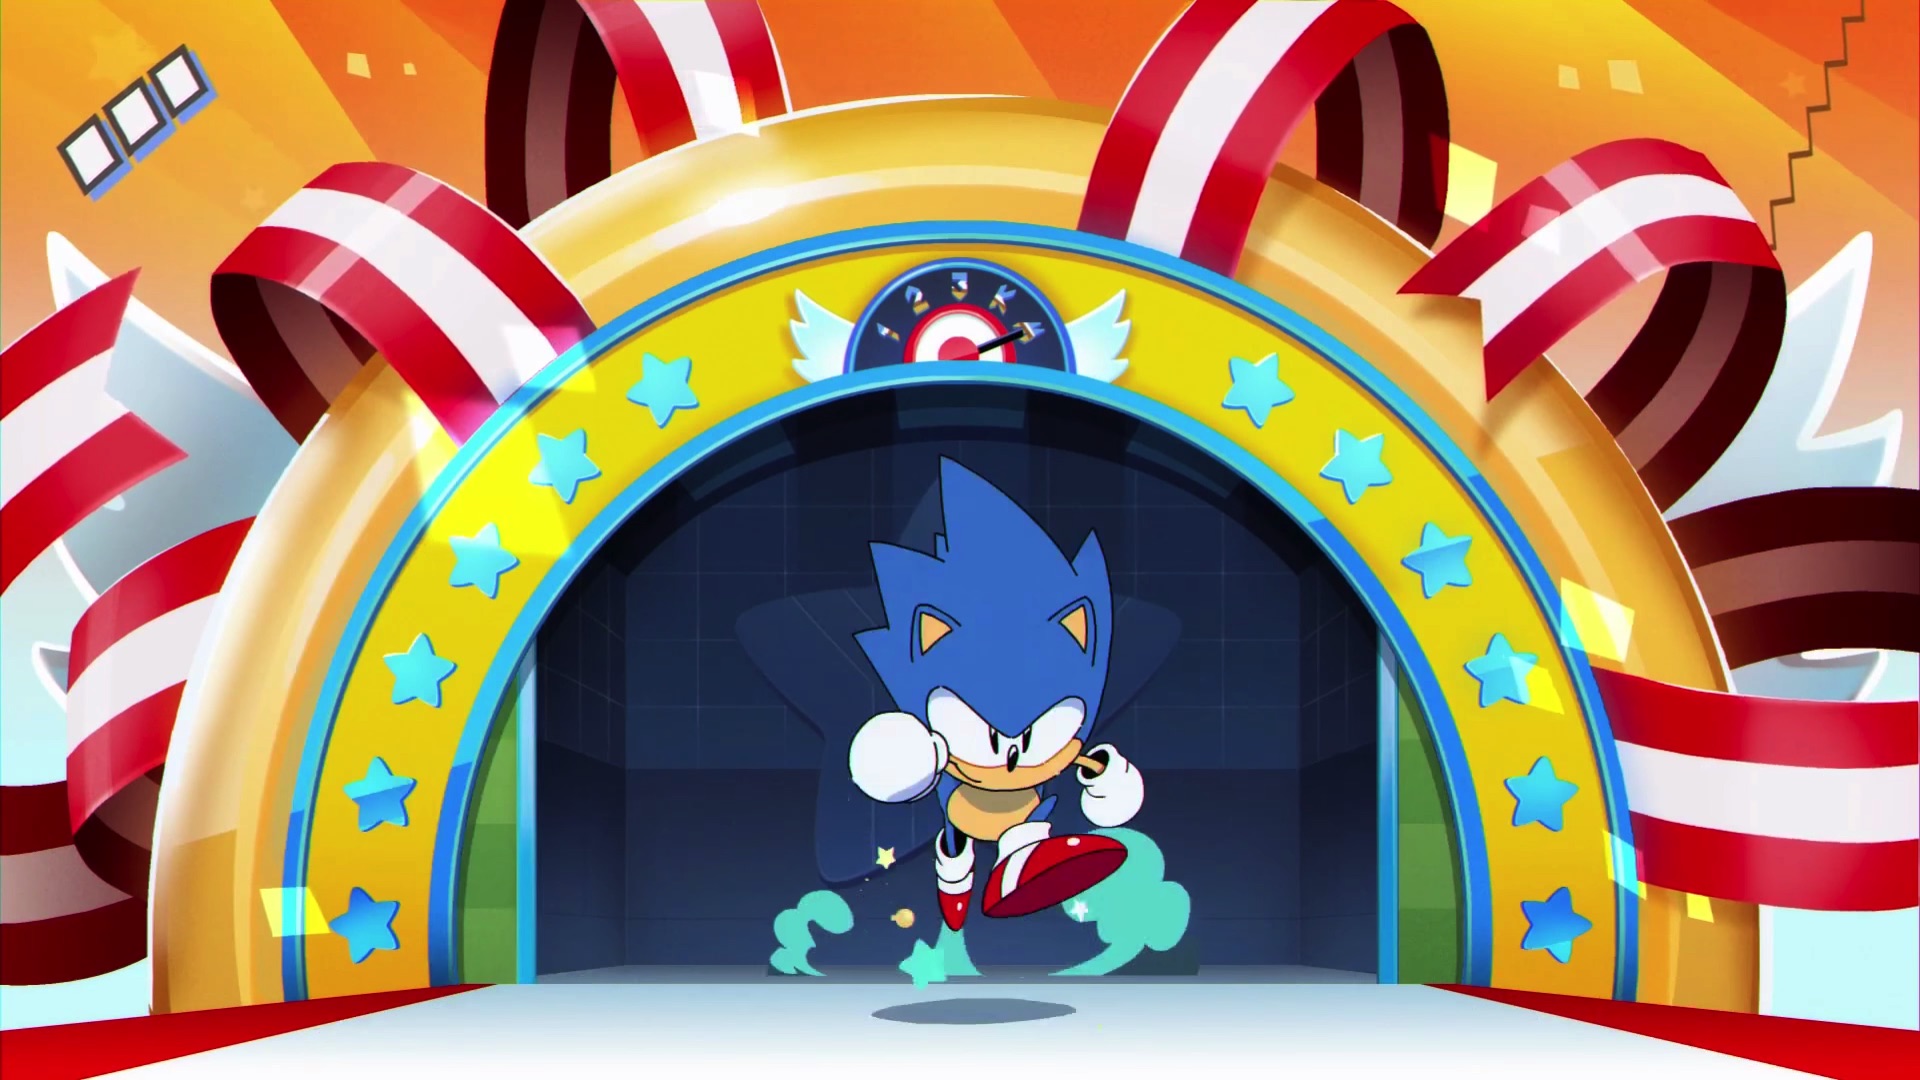 does sonic mania have a game disk